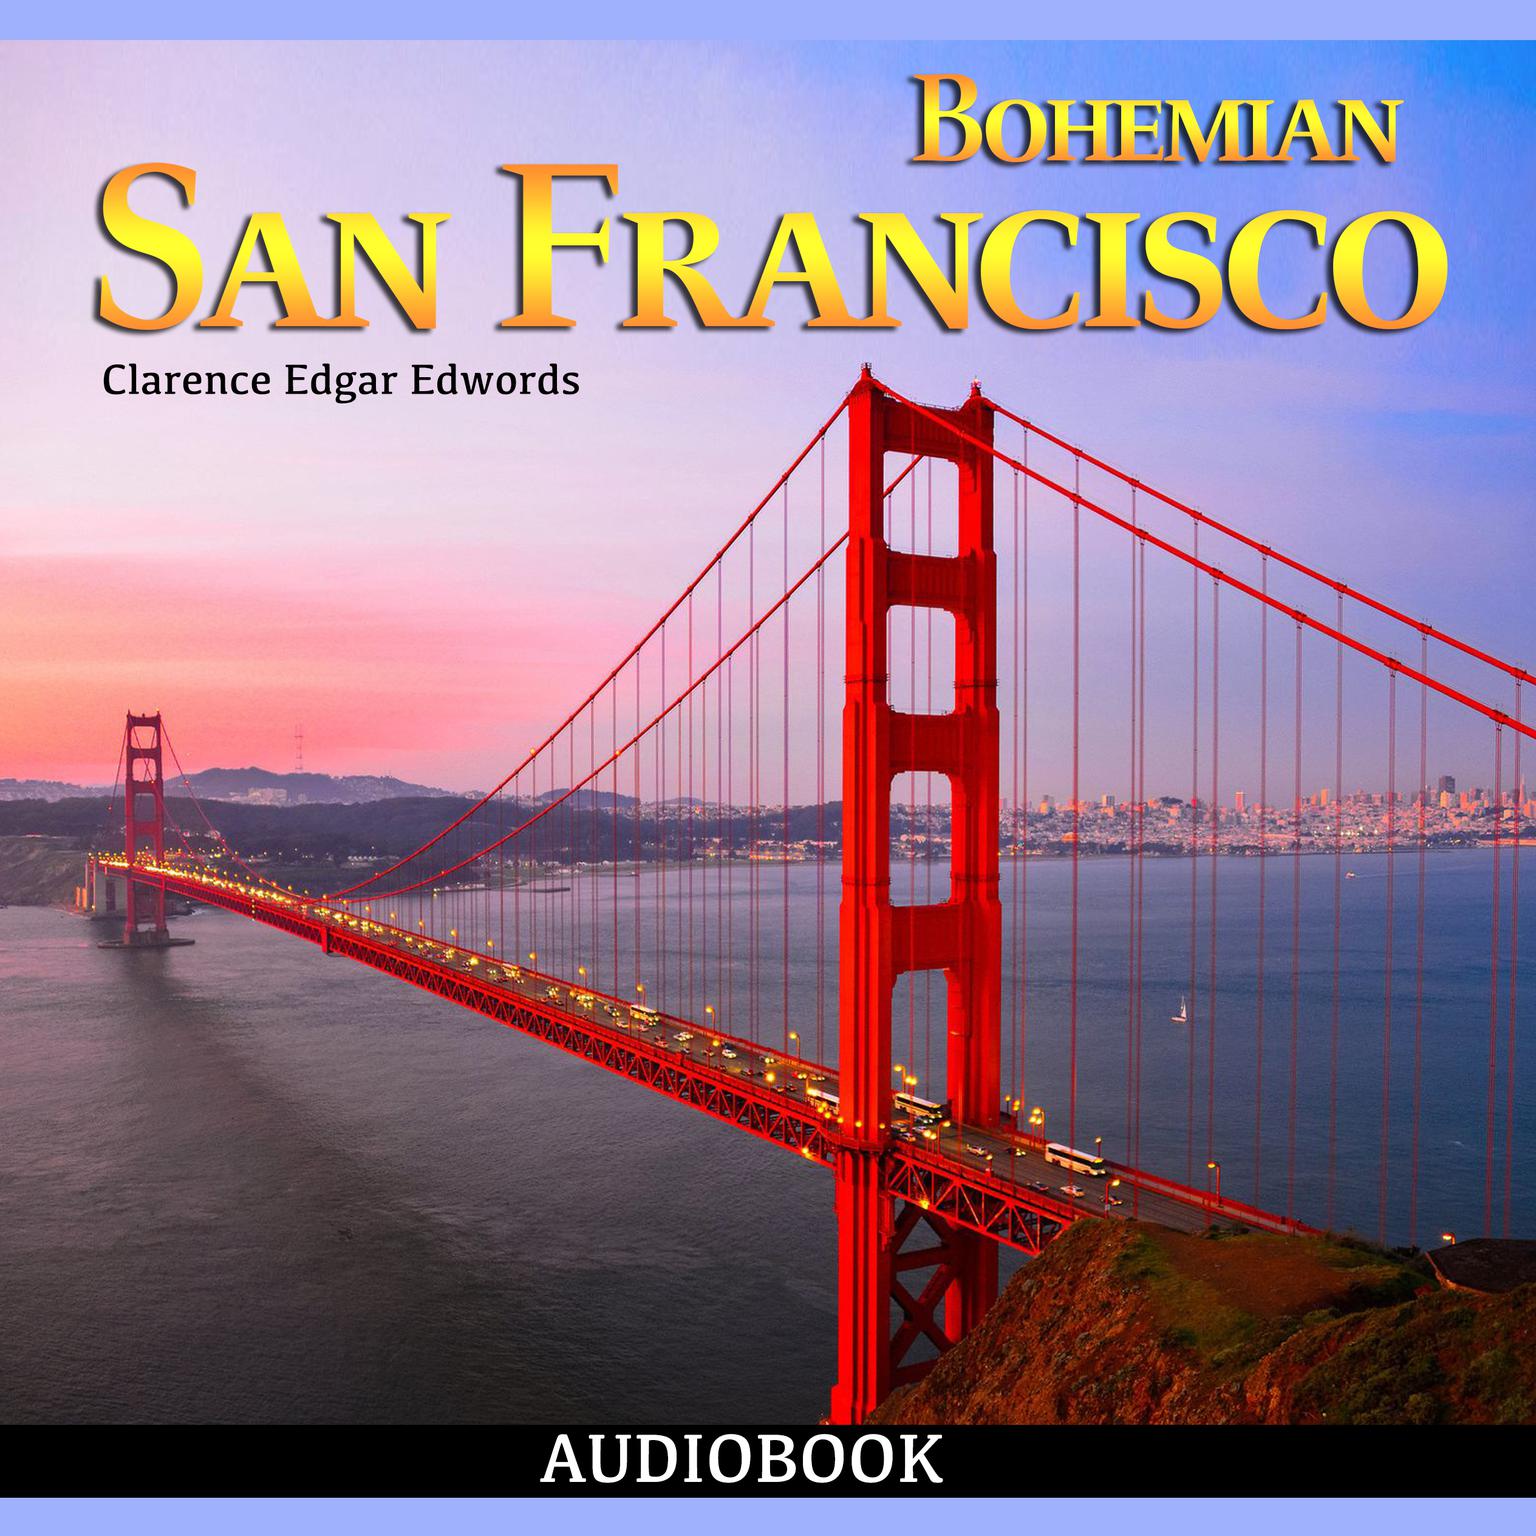 Bohemian San Francisco: The Elegant Art of Dining Audiobook, by Clarence Edgar Edwords